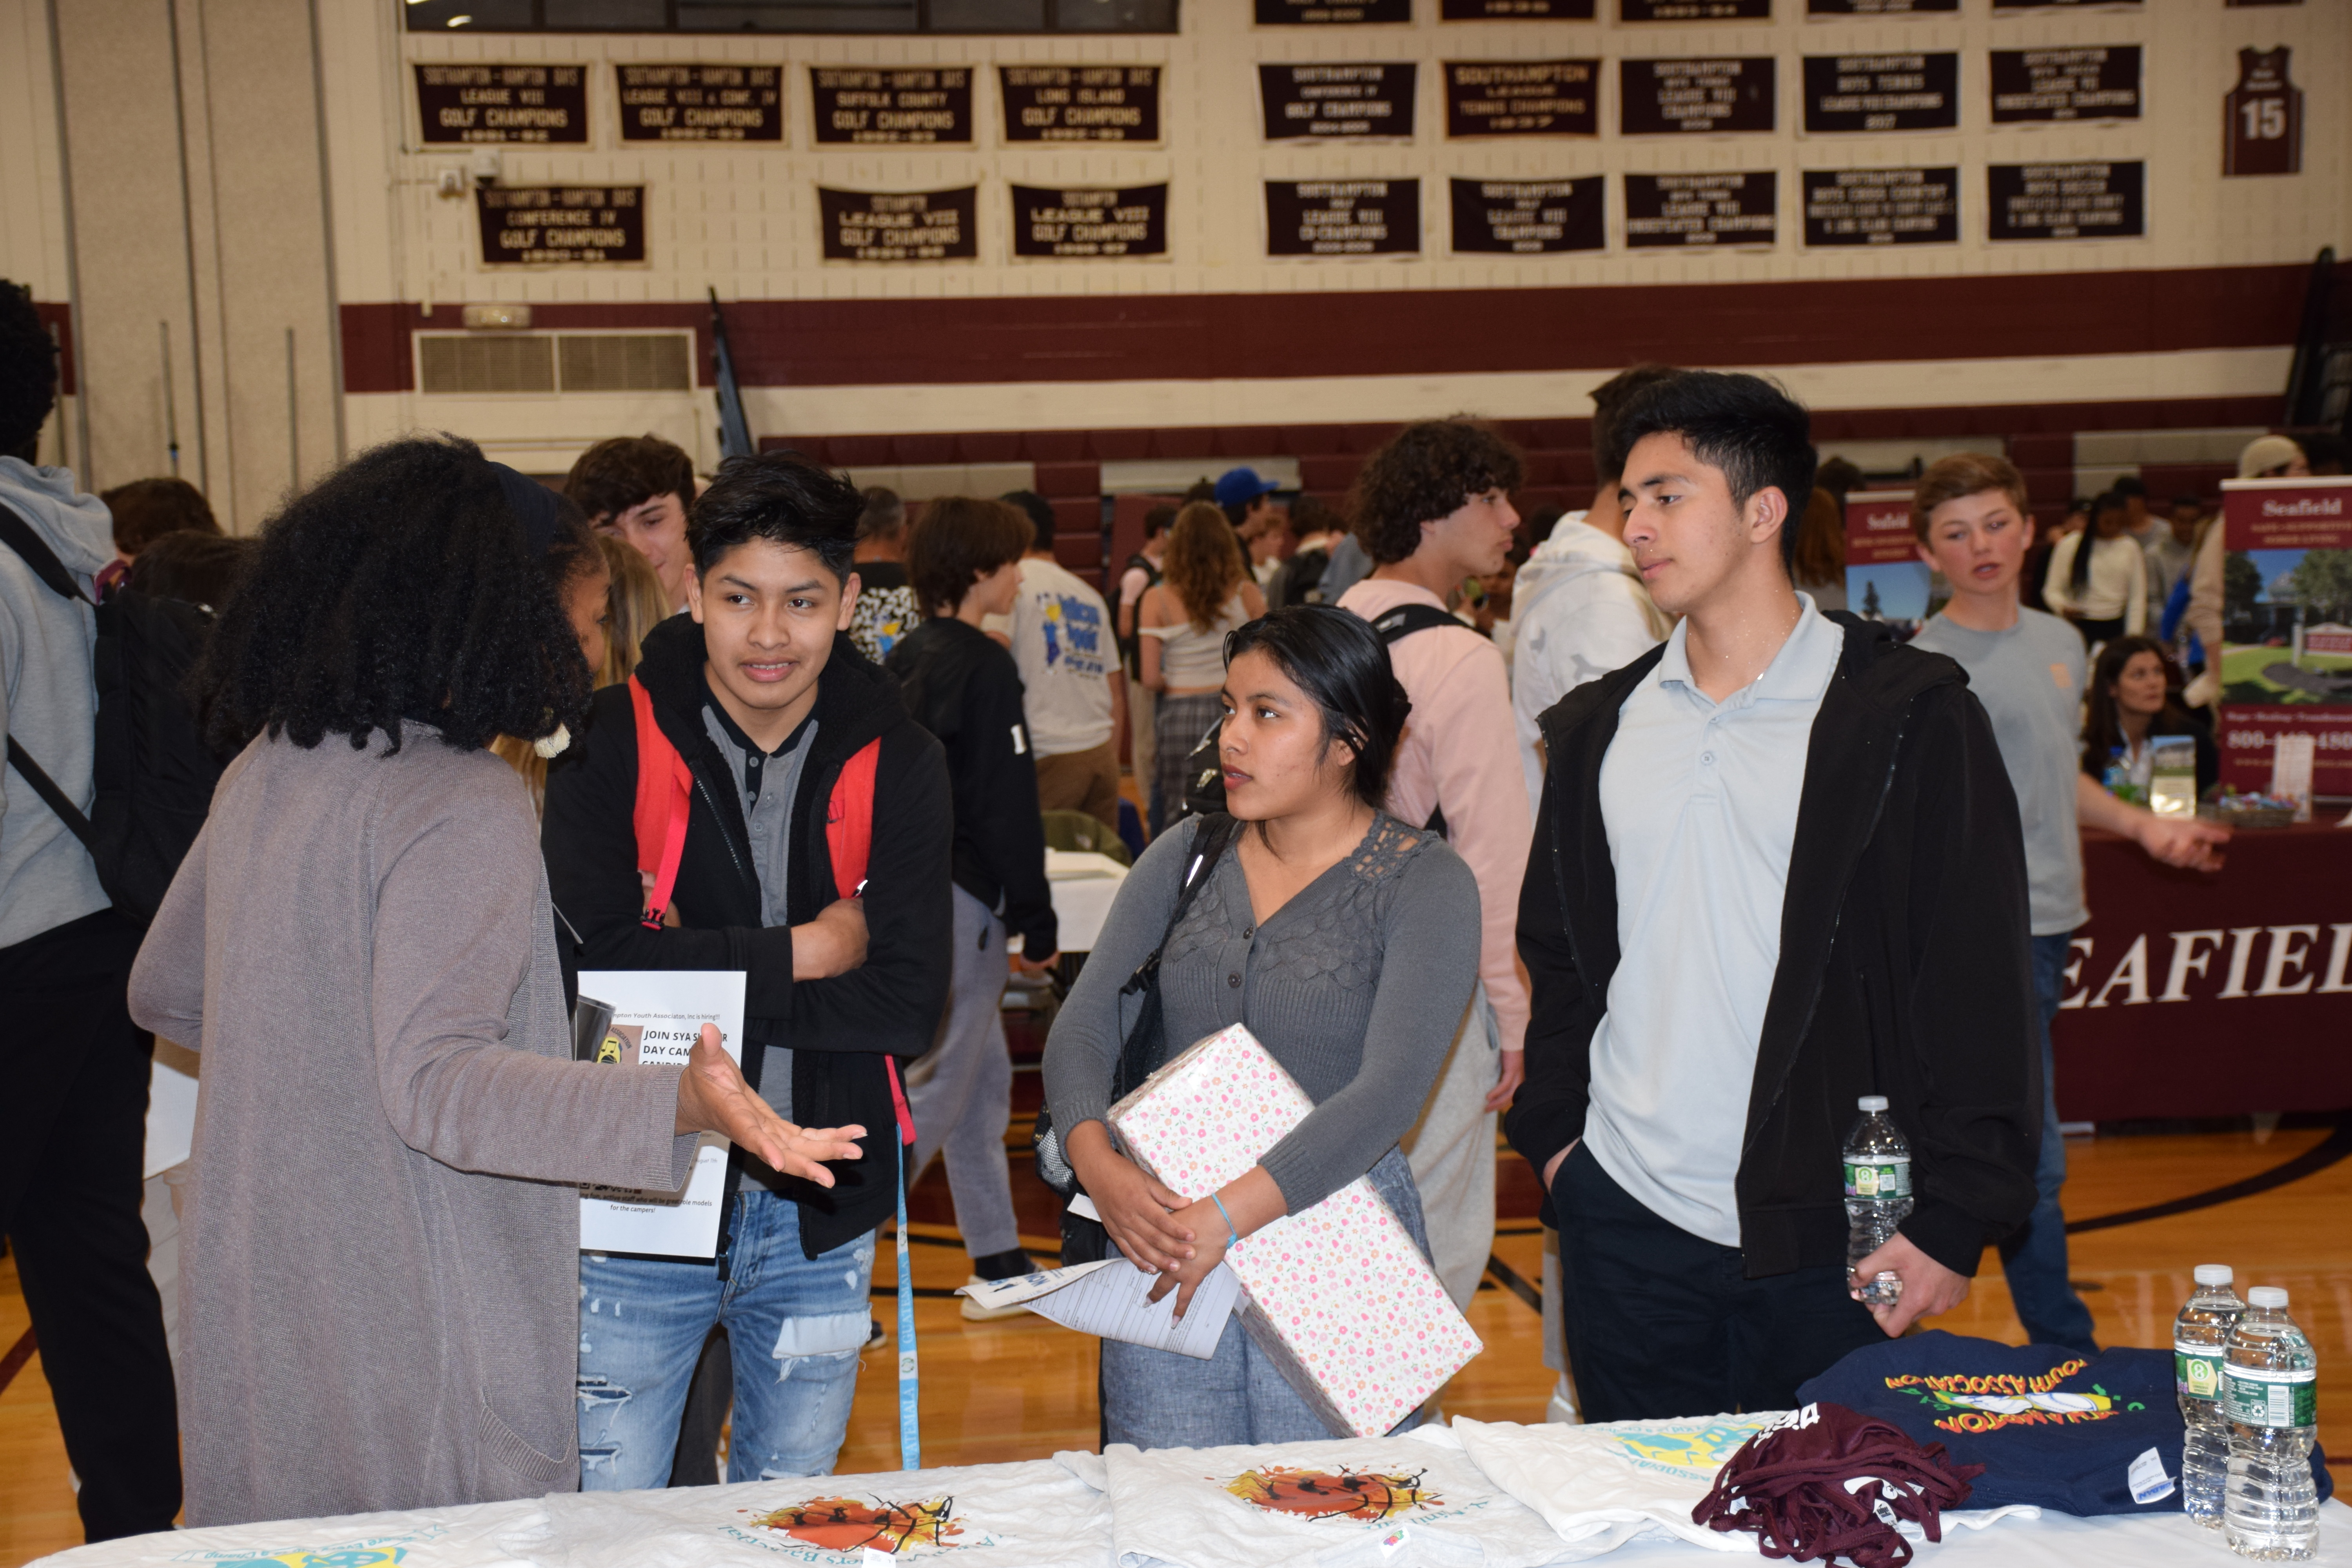 To help students obtain summer work experience, the Southampton School District hosted a job fair at the high school on April 27. The fair gave participating students the opportunity to gather career information and apply for jobs at more than 70 local businesses. COURTESY SOUTHAMPTON SCHOOL DISTRICT